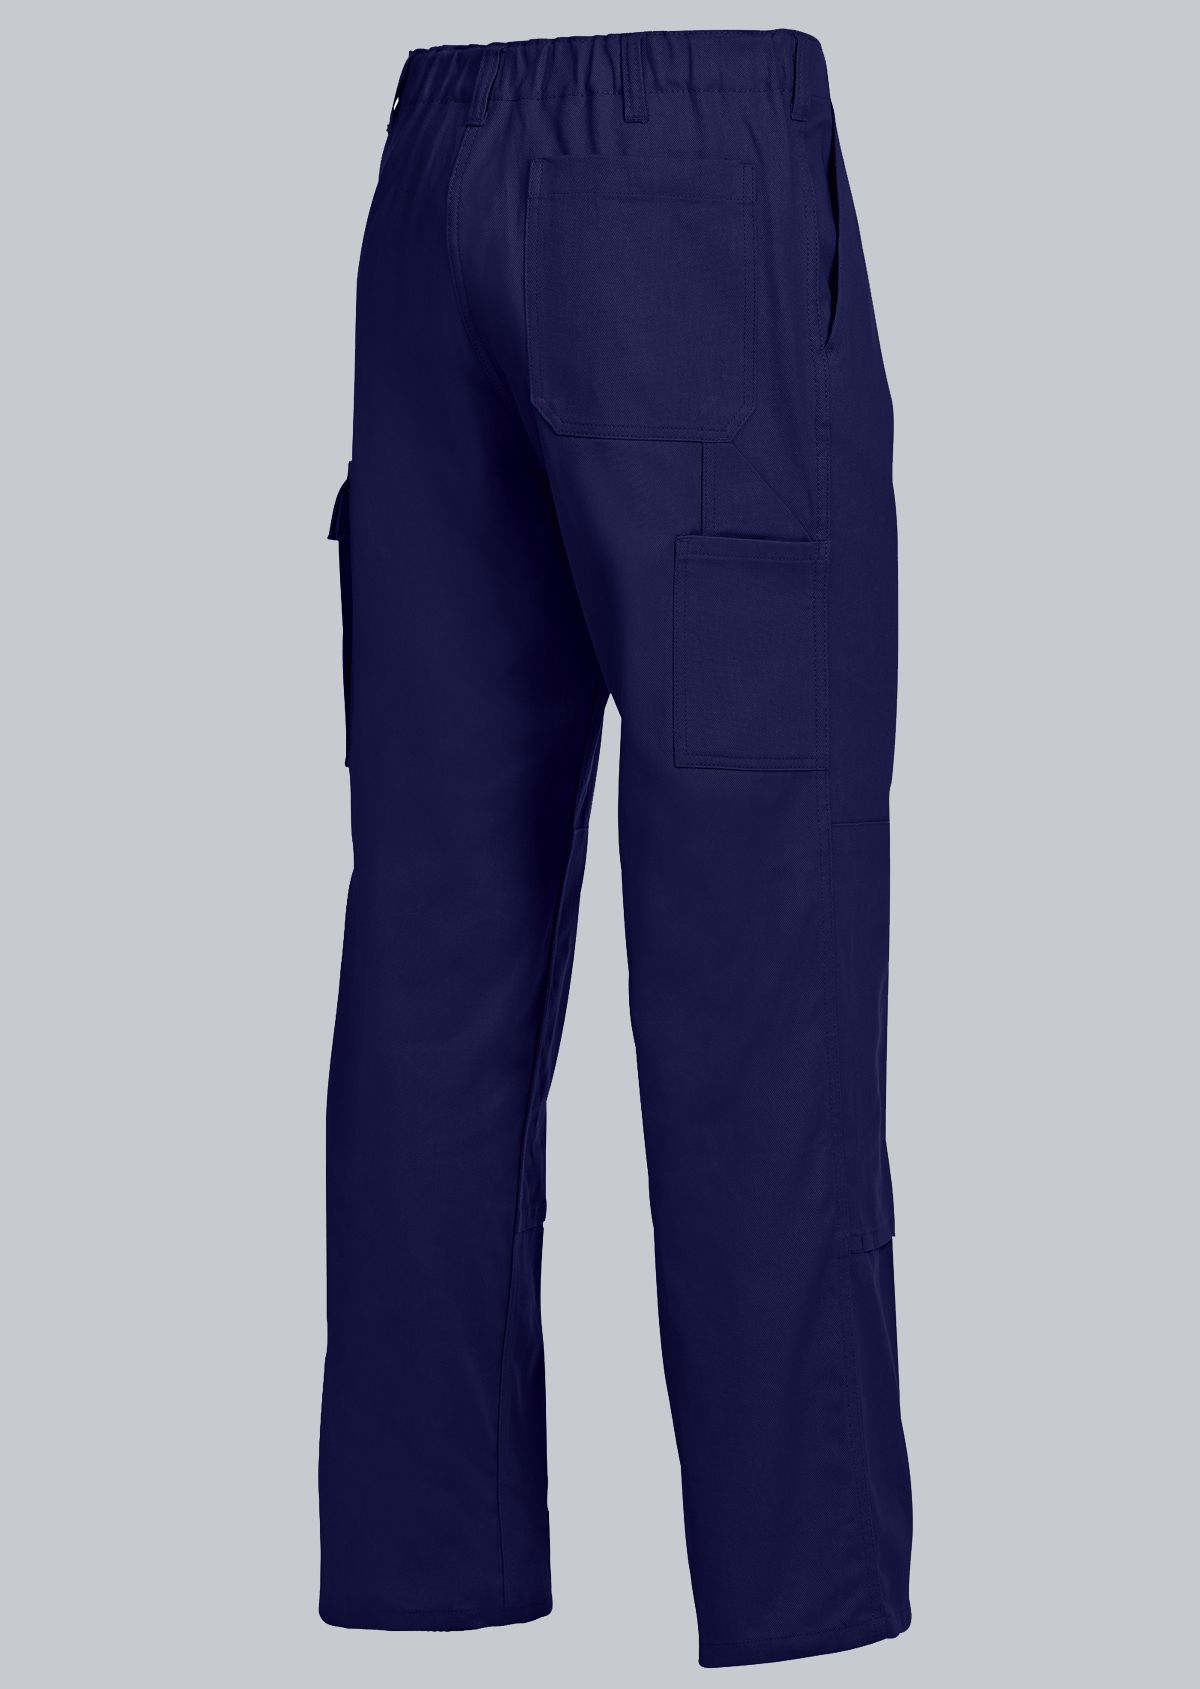 BP® Cotton basic work trousers with knee pad pockets